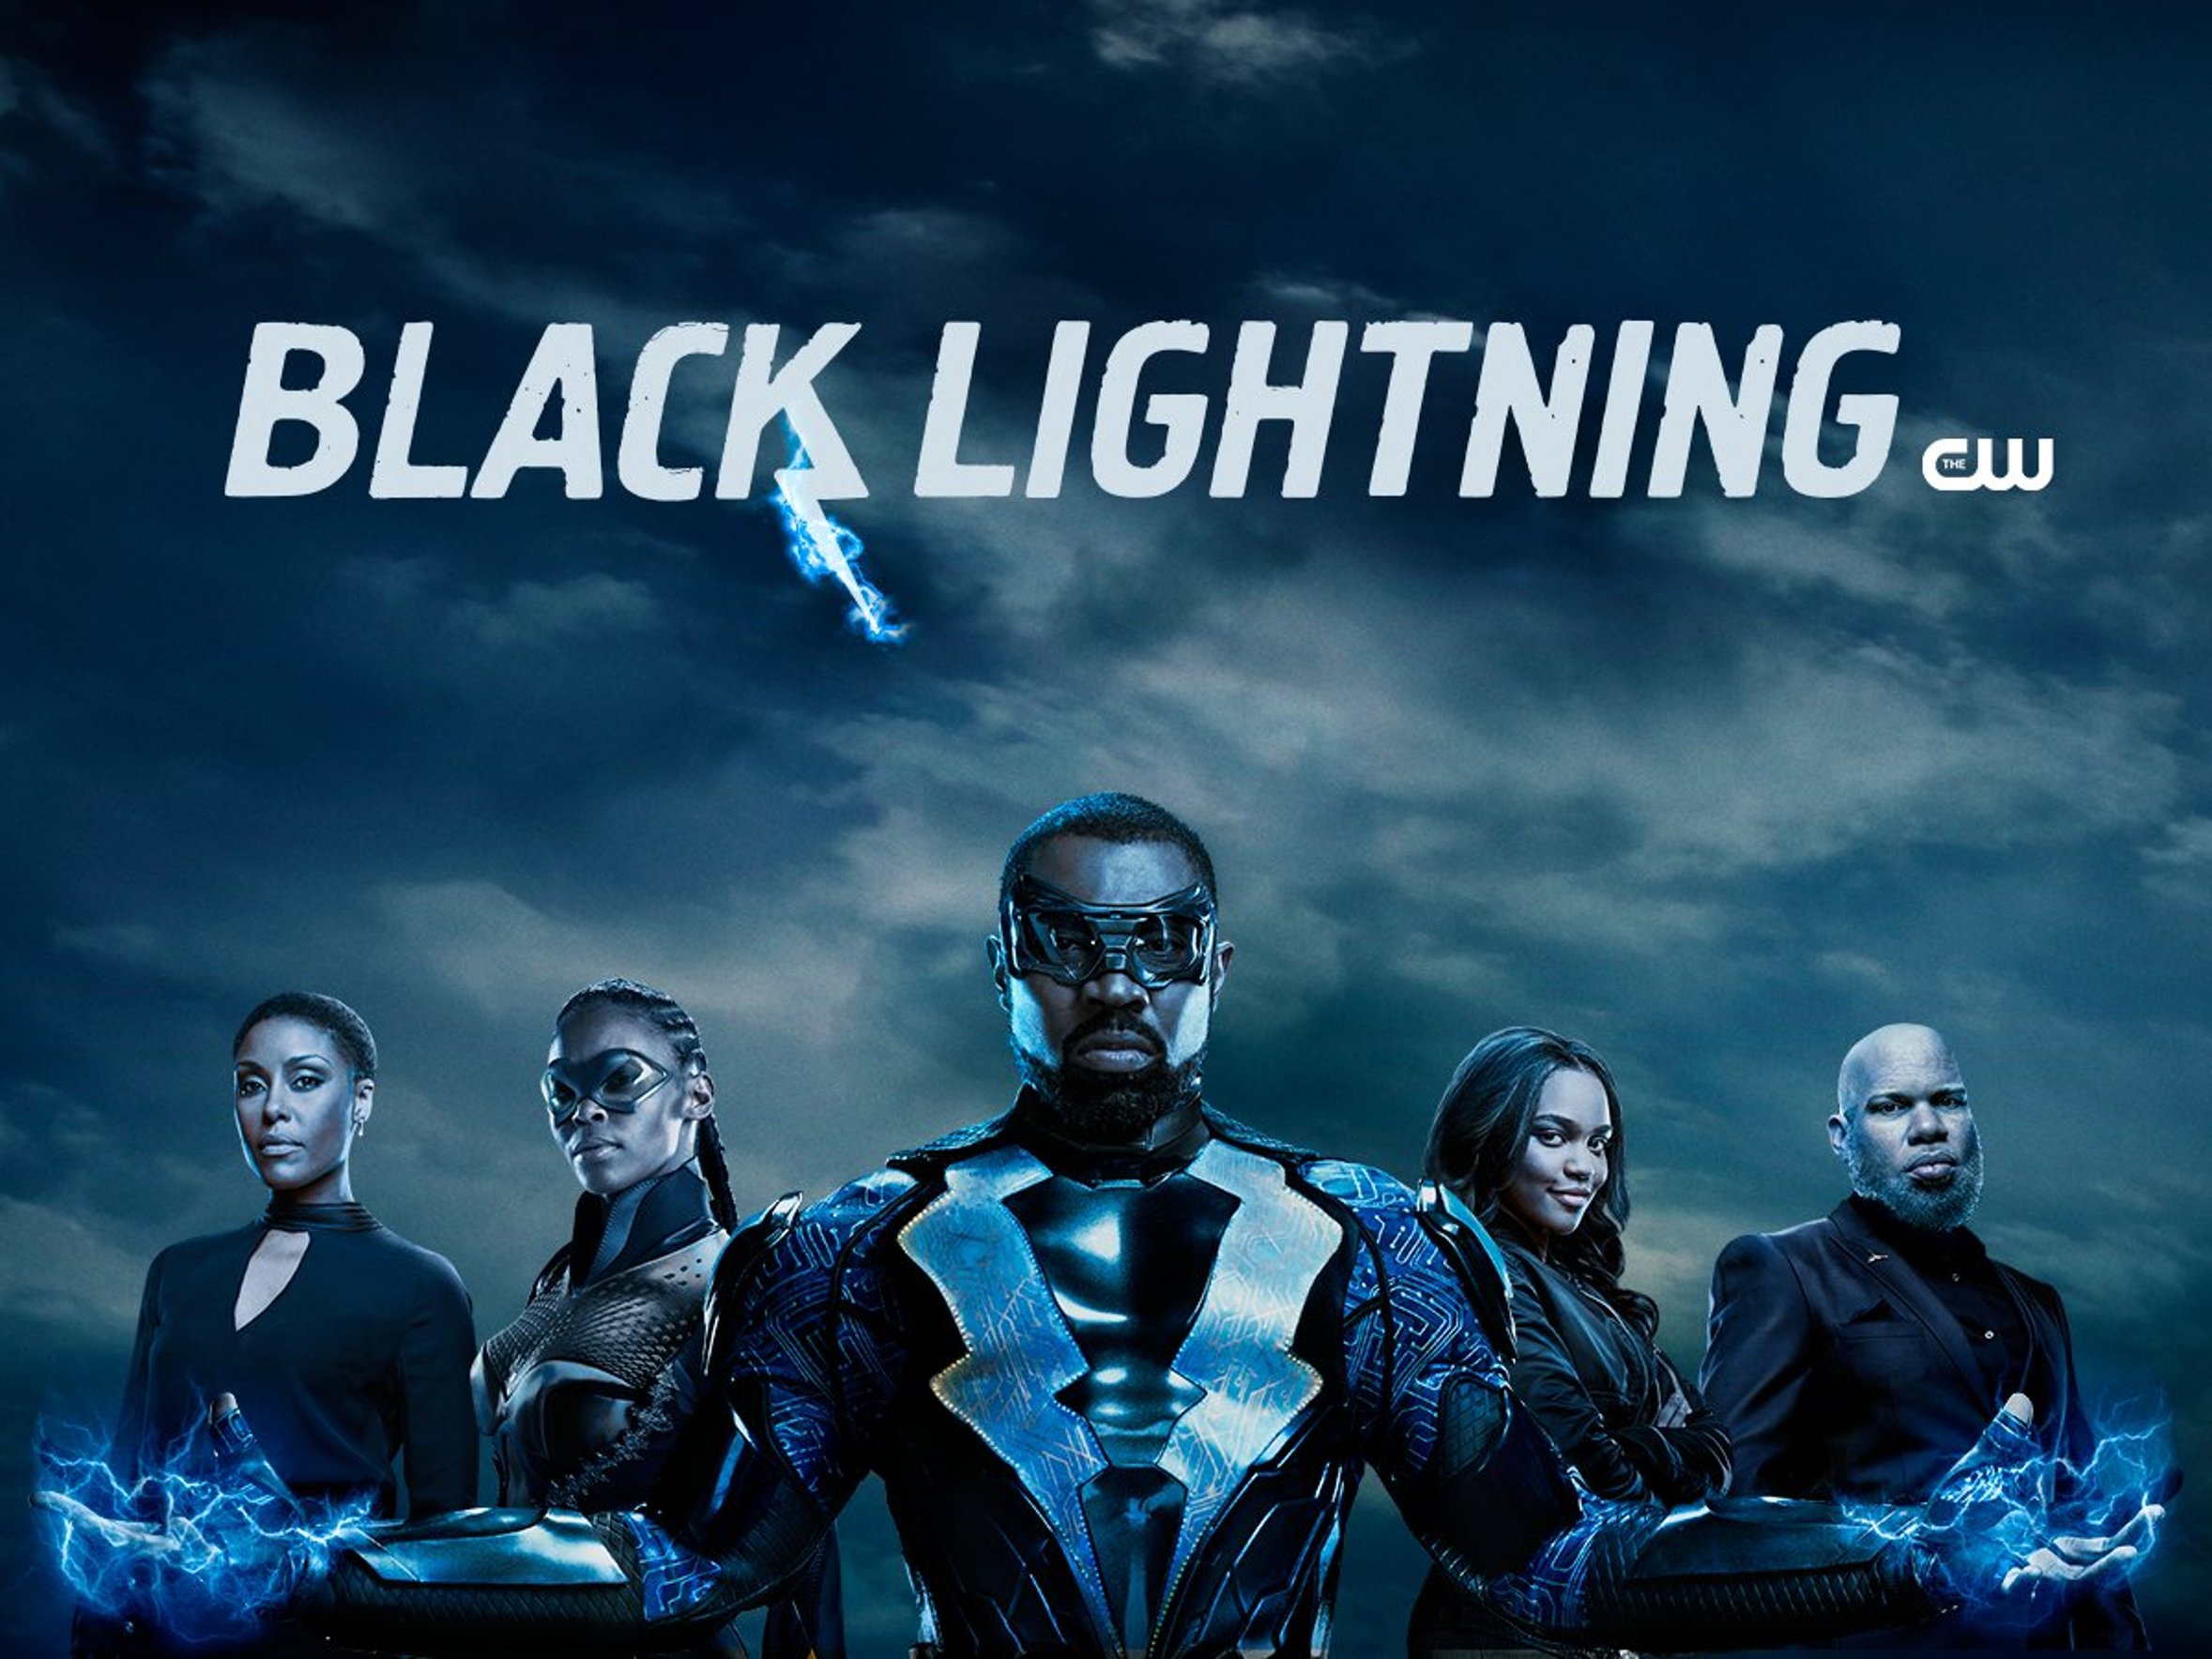 Casting African-American Street Toughs For The CW TV Show Black Lightning